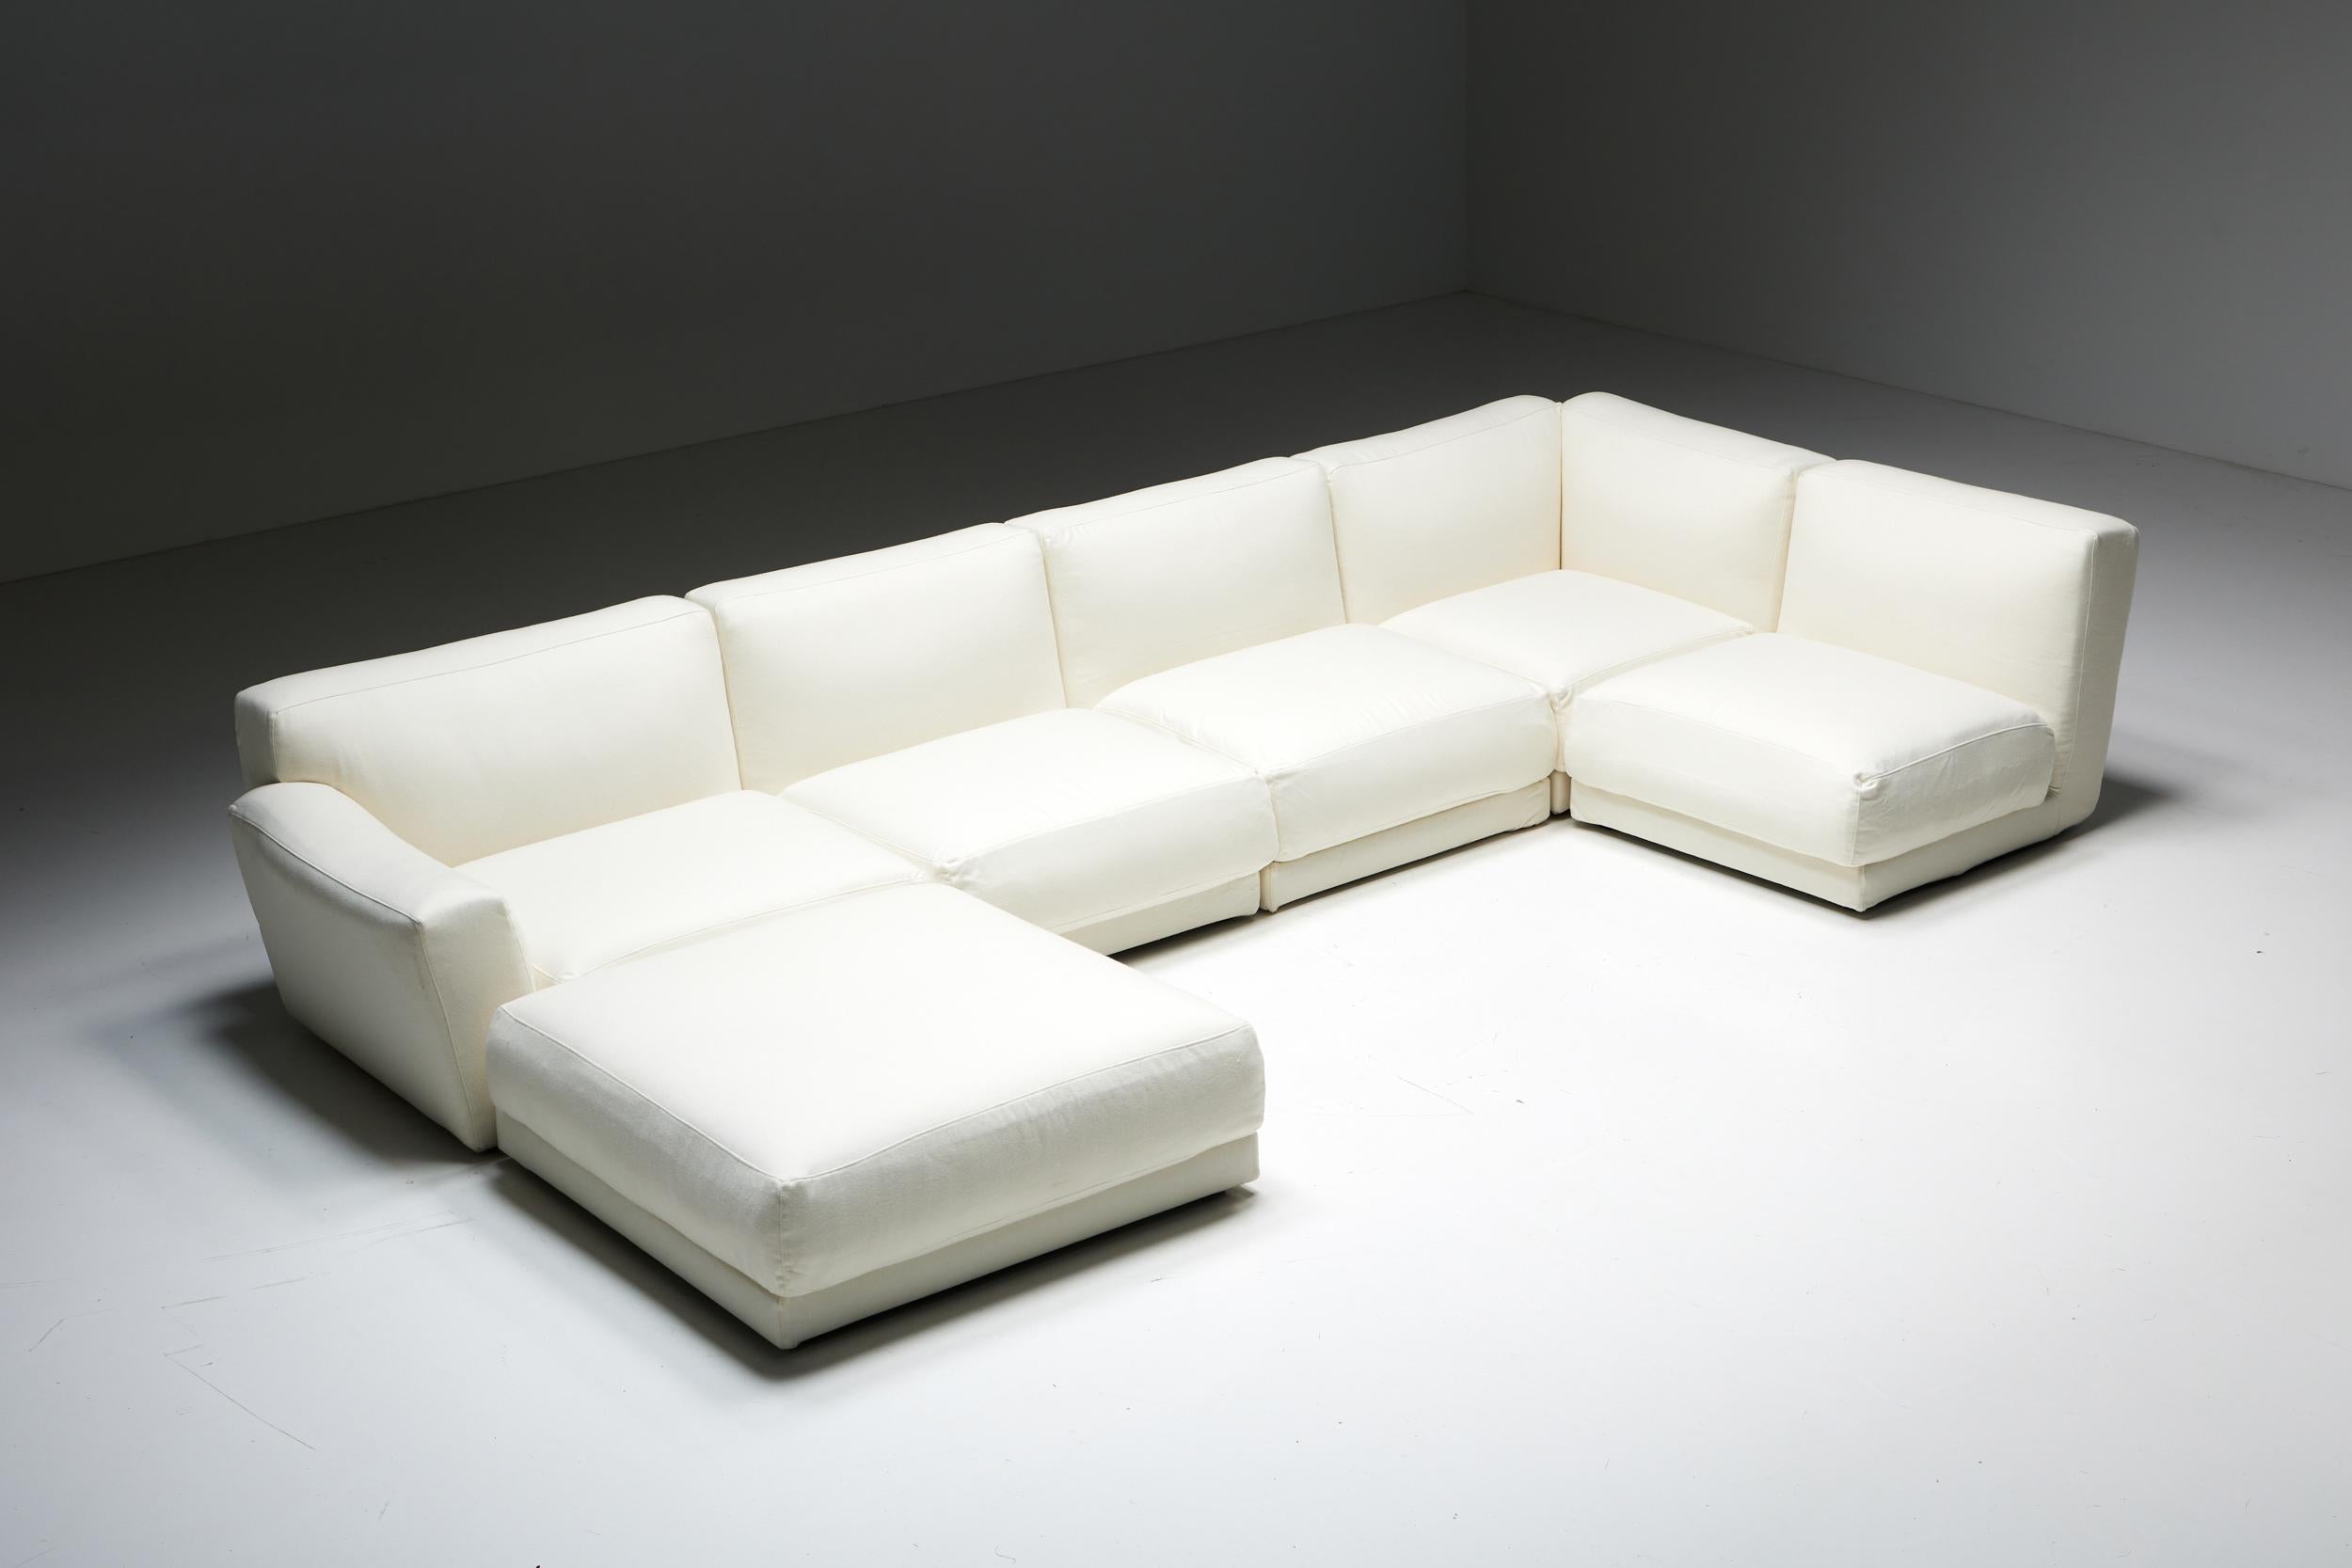 Modular Sofa; B&B Italia; Maxalto; Luis; 21th century; Contemporary Design; Antonio Citterio;

Modular sofa 'Luis', designed by Antonio Citterio for B&B Italia in 2007, is a luxurious and versatile piece that offers exceptional comfort and style.